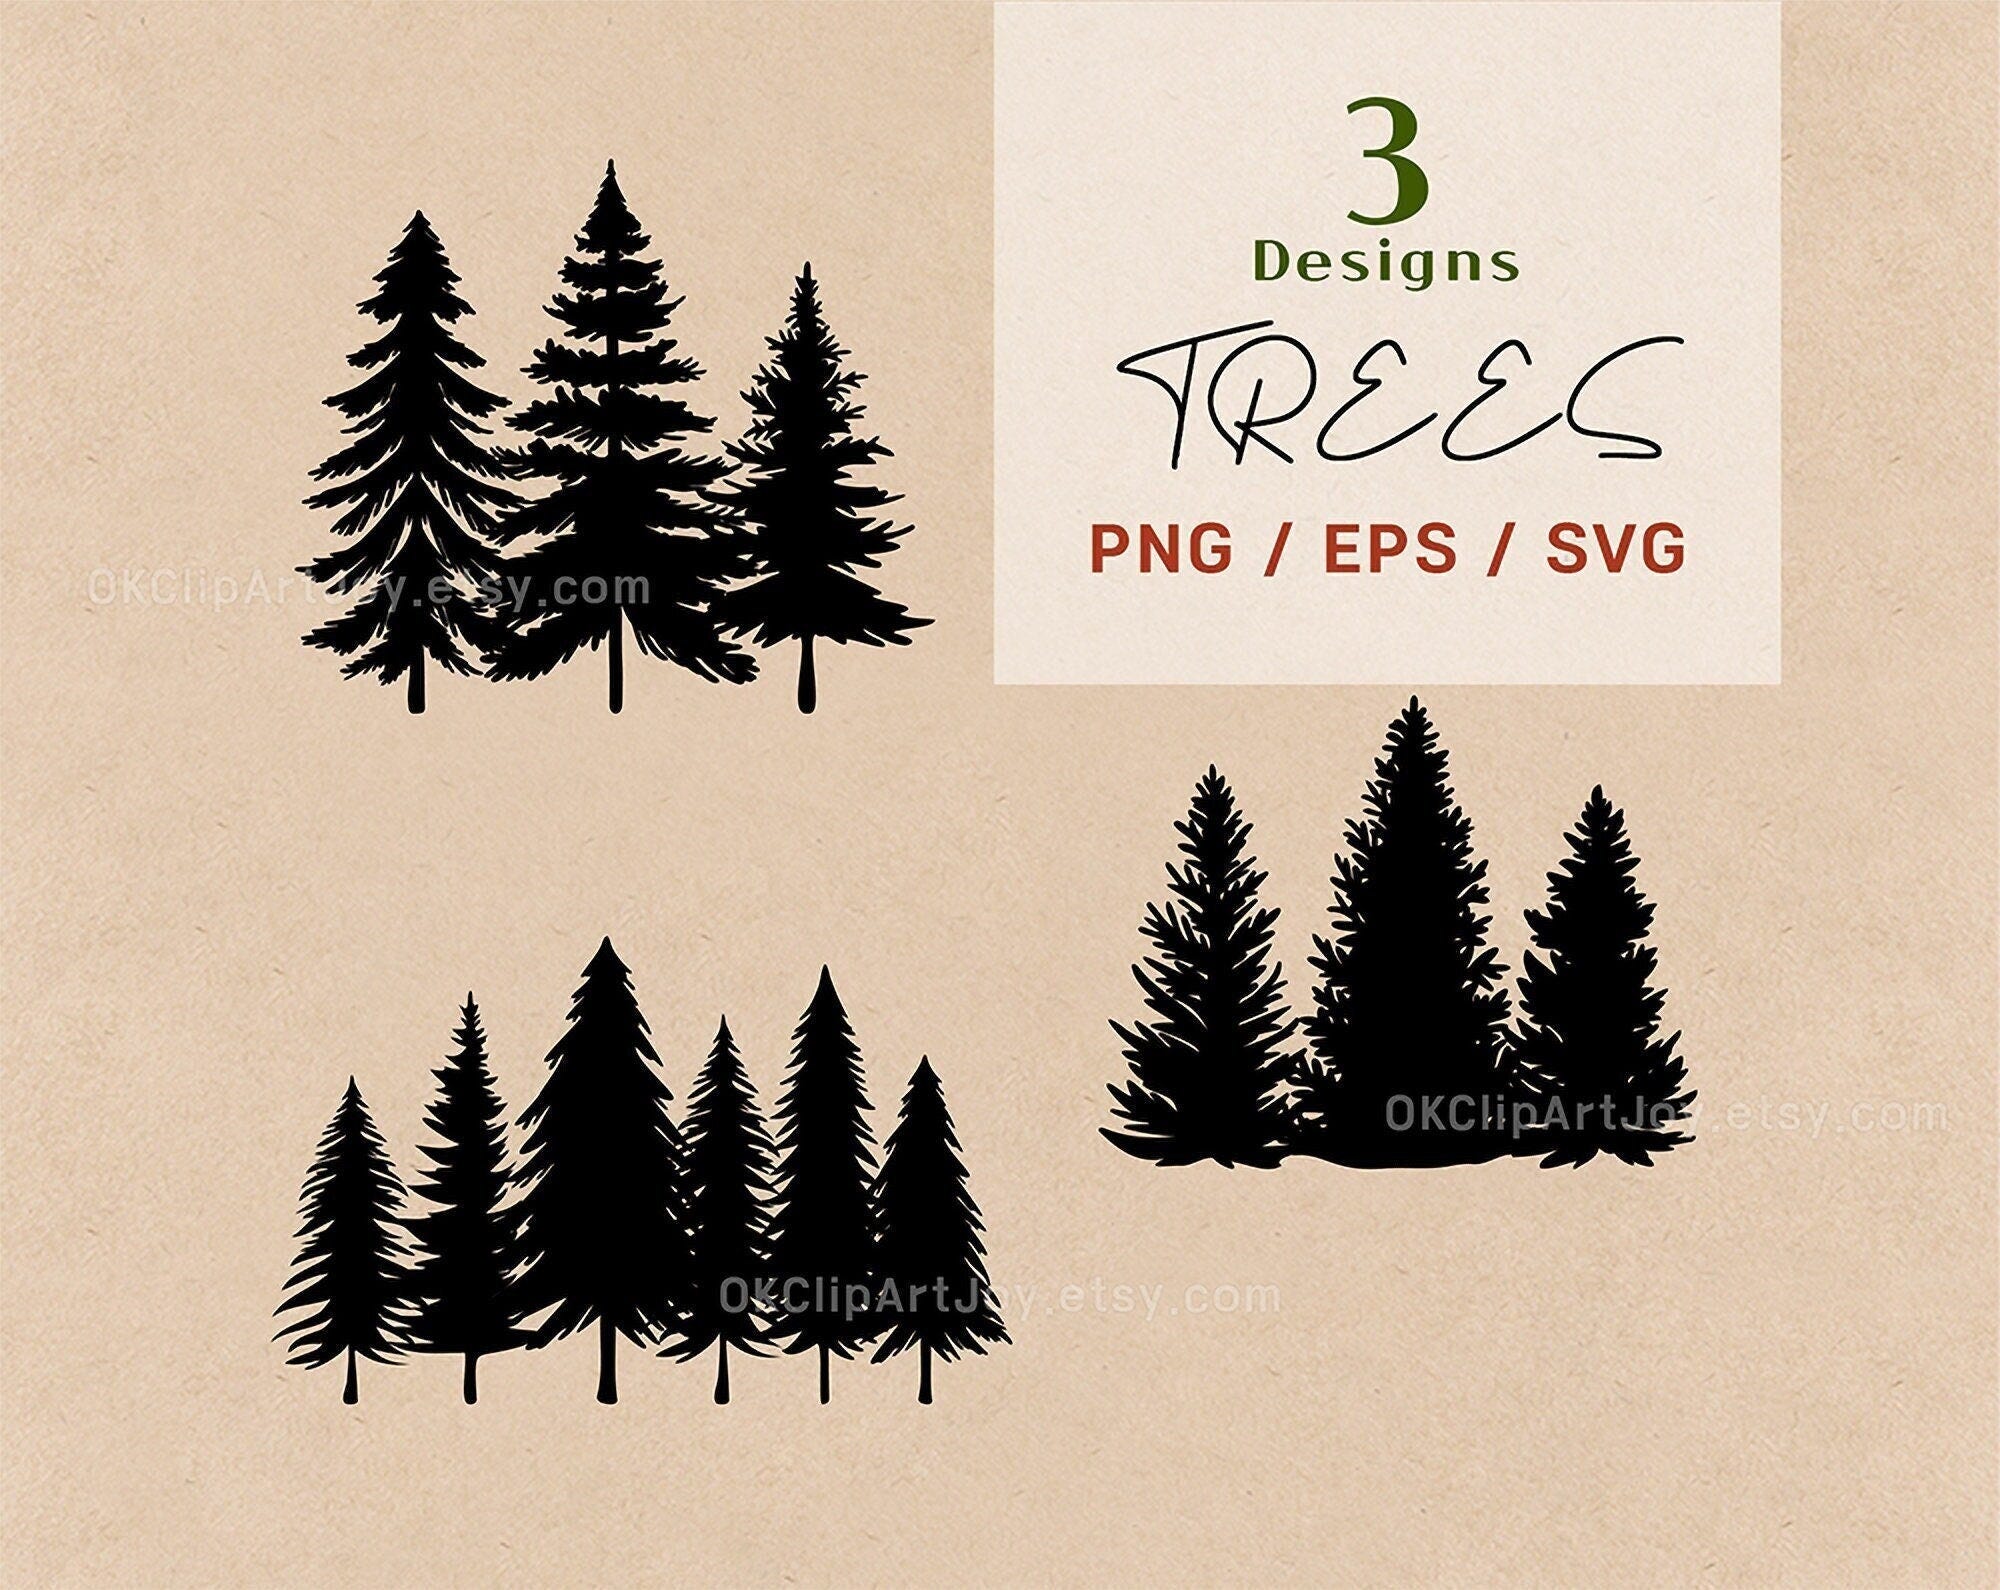 Tree Line Svg, Forest Svg, Tree Svg, Tree Silhouette Svg, Treeline Svg, Pine Tree Svg, Trees Svg, Silhouette Png, Christmas Tree Clipart